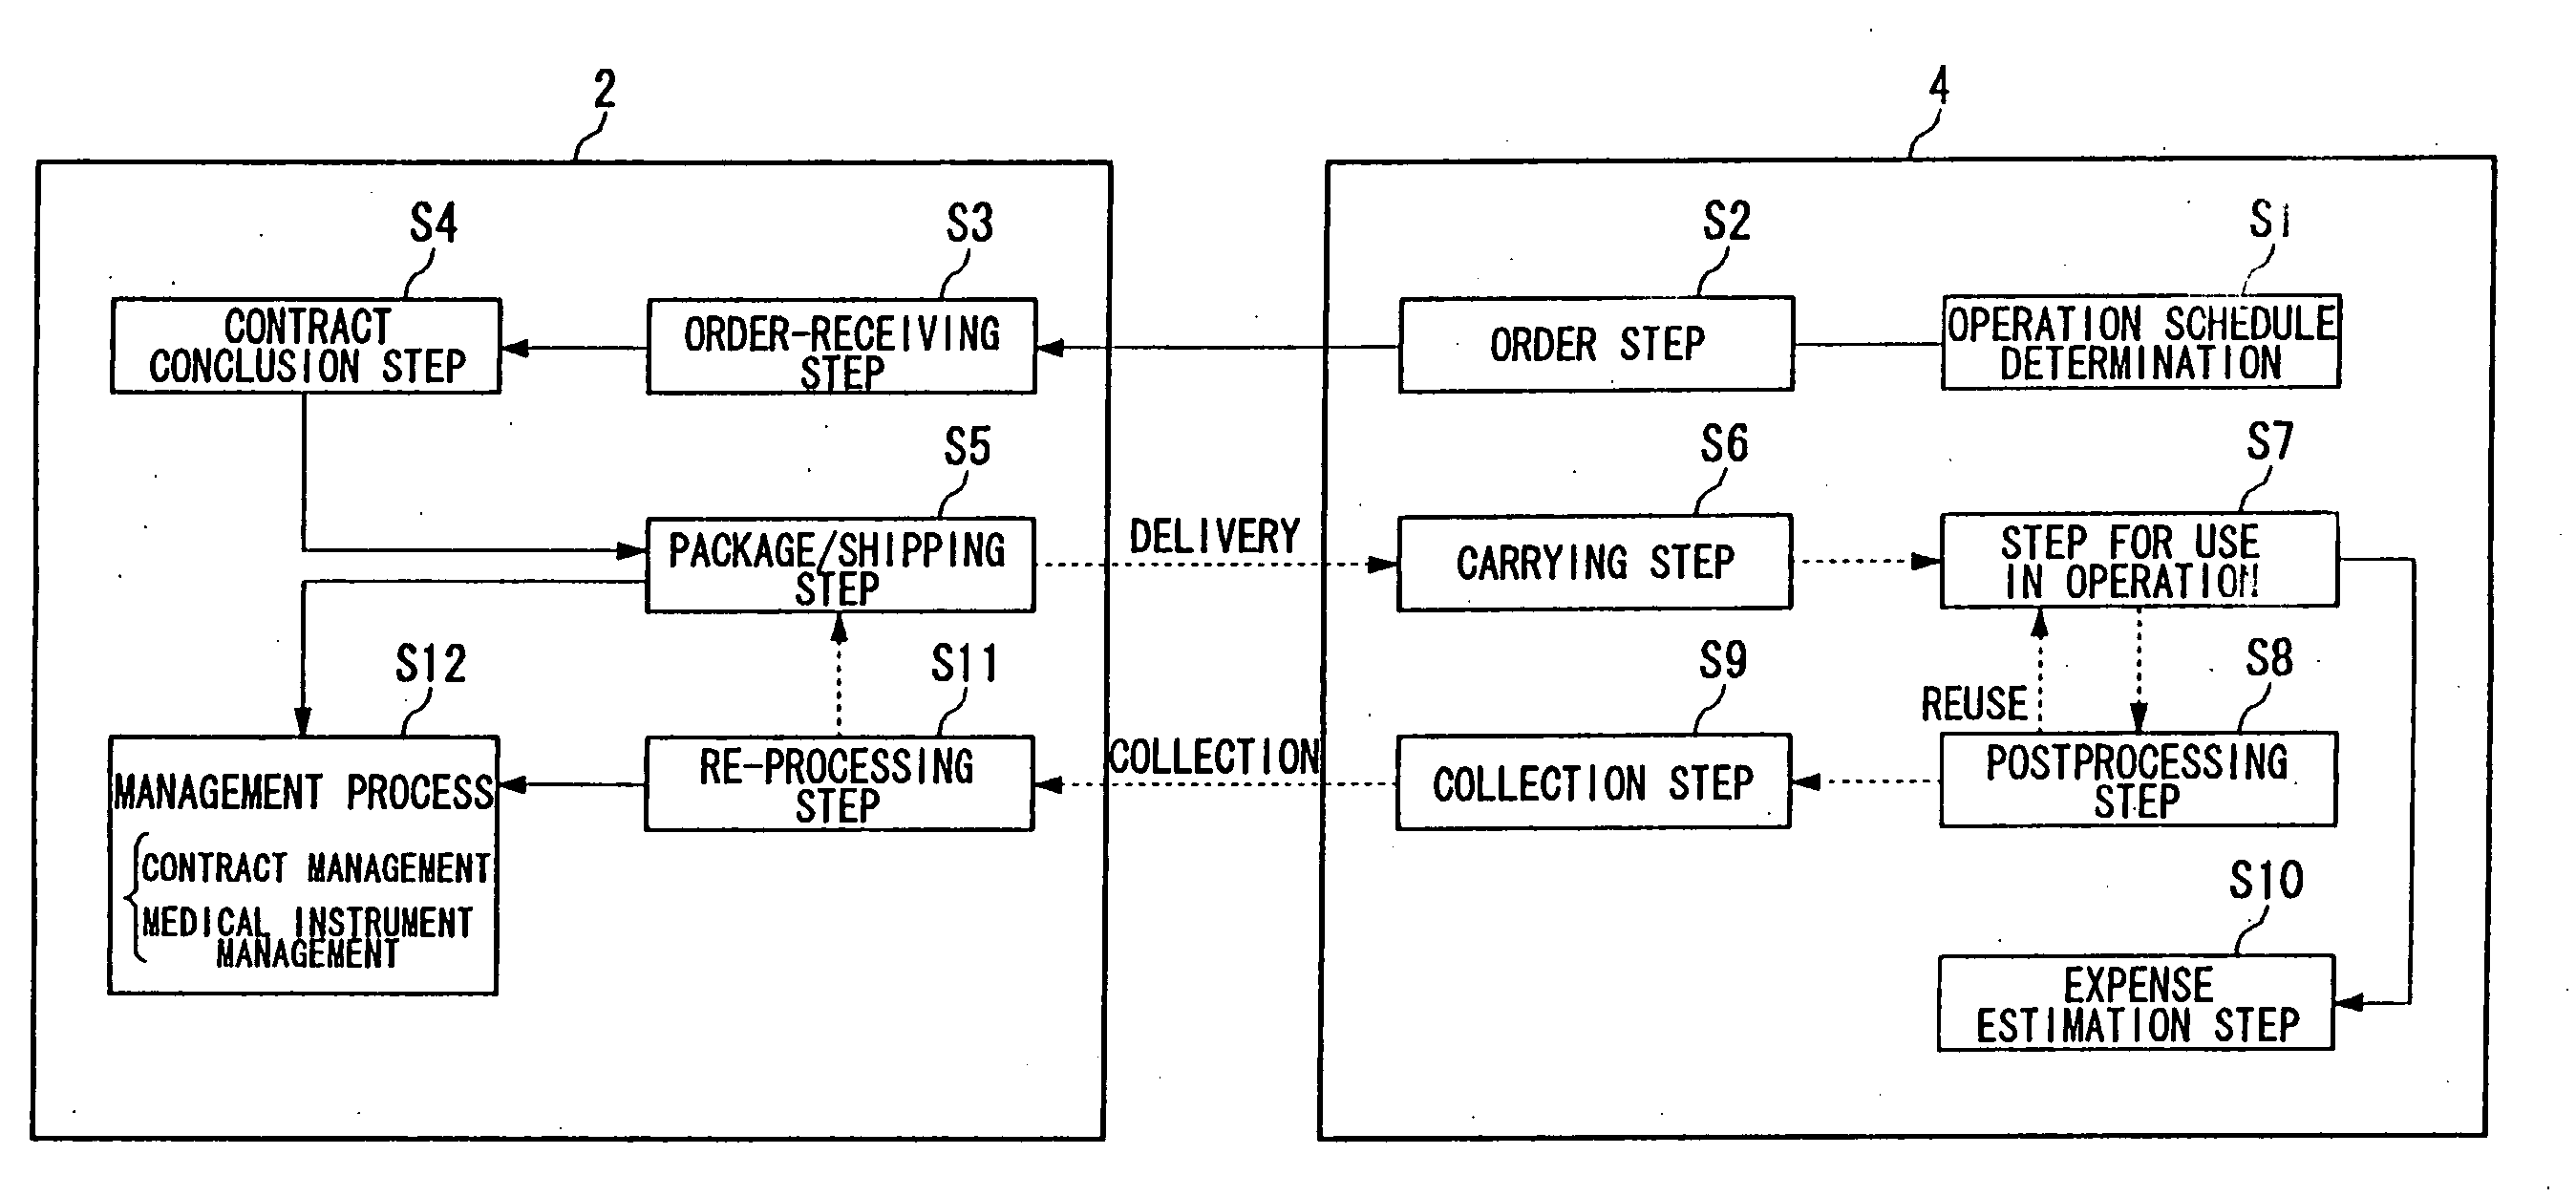 Medical instrument and equipment for managing of the same